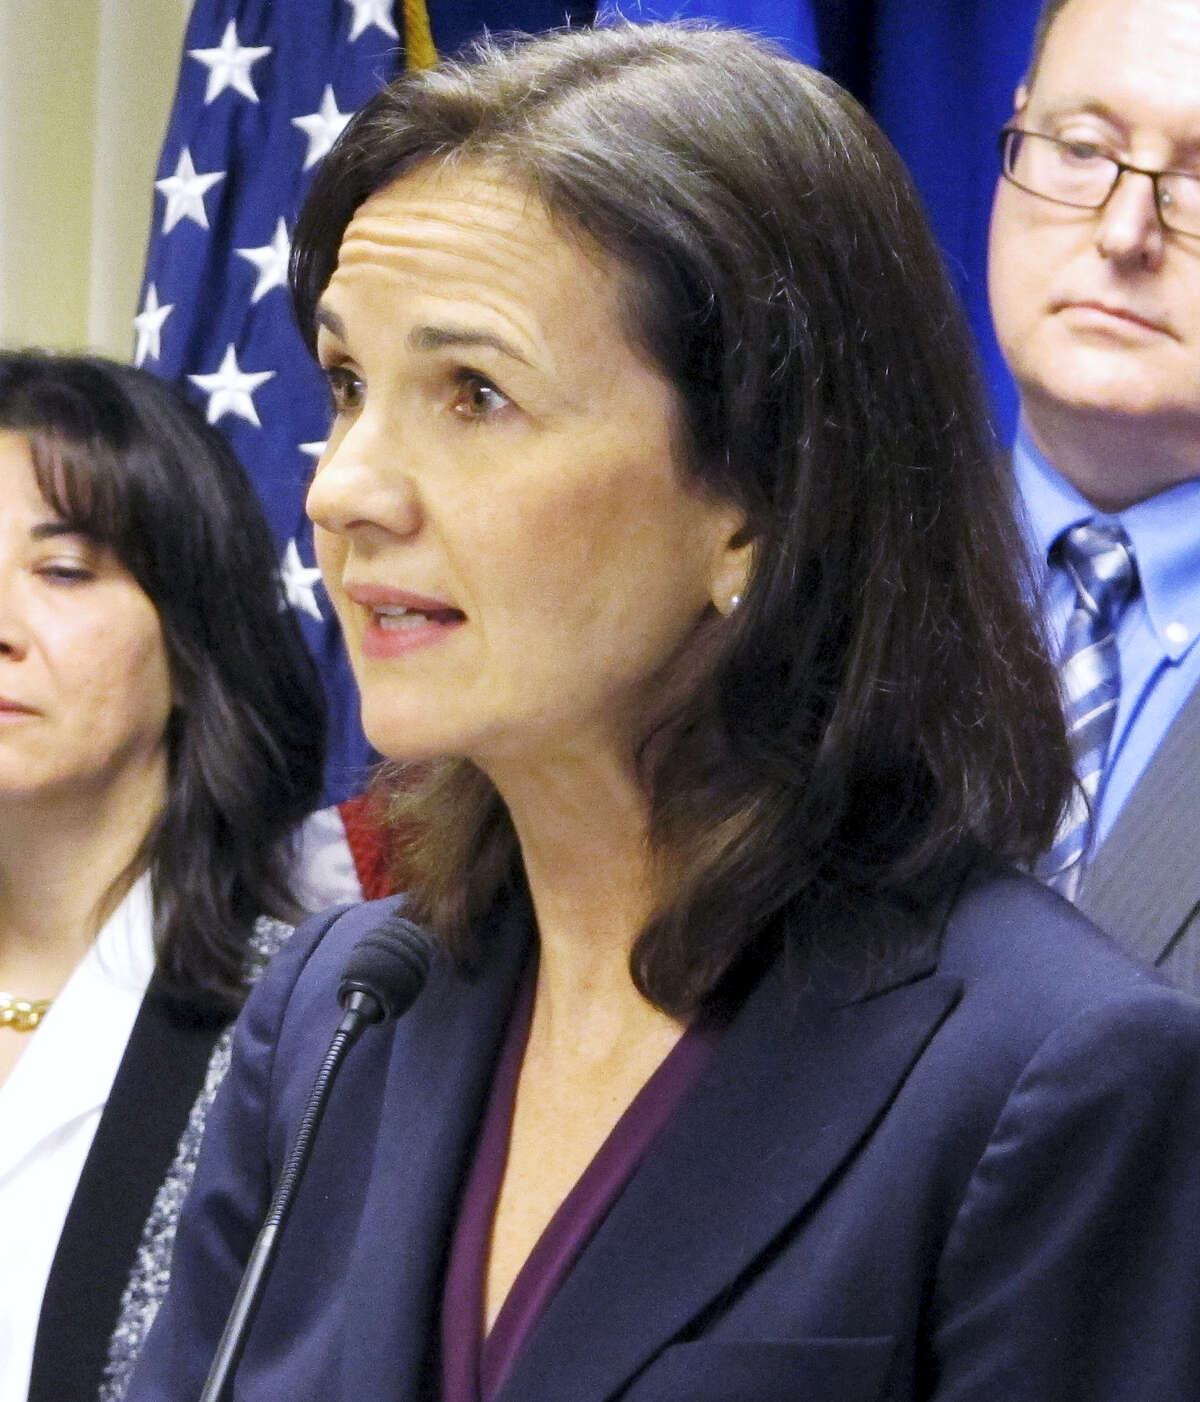 In this file photo, Deirdre Daly, U.S. attorney for Connecticut, stands with other federal officials while announcing a new public corruption task force in New Haven, Conn. Daly is facing an uncertain job future as the presidency changes hands from one political party to another when Donald Trump is sworn into office in January 2017. She has been the top federal prosecutor in the state since 2014, after being nominated by outgoing Democratic President Barack Obama.